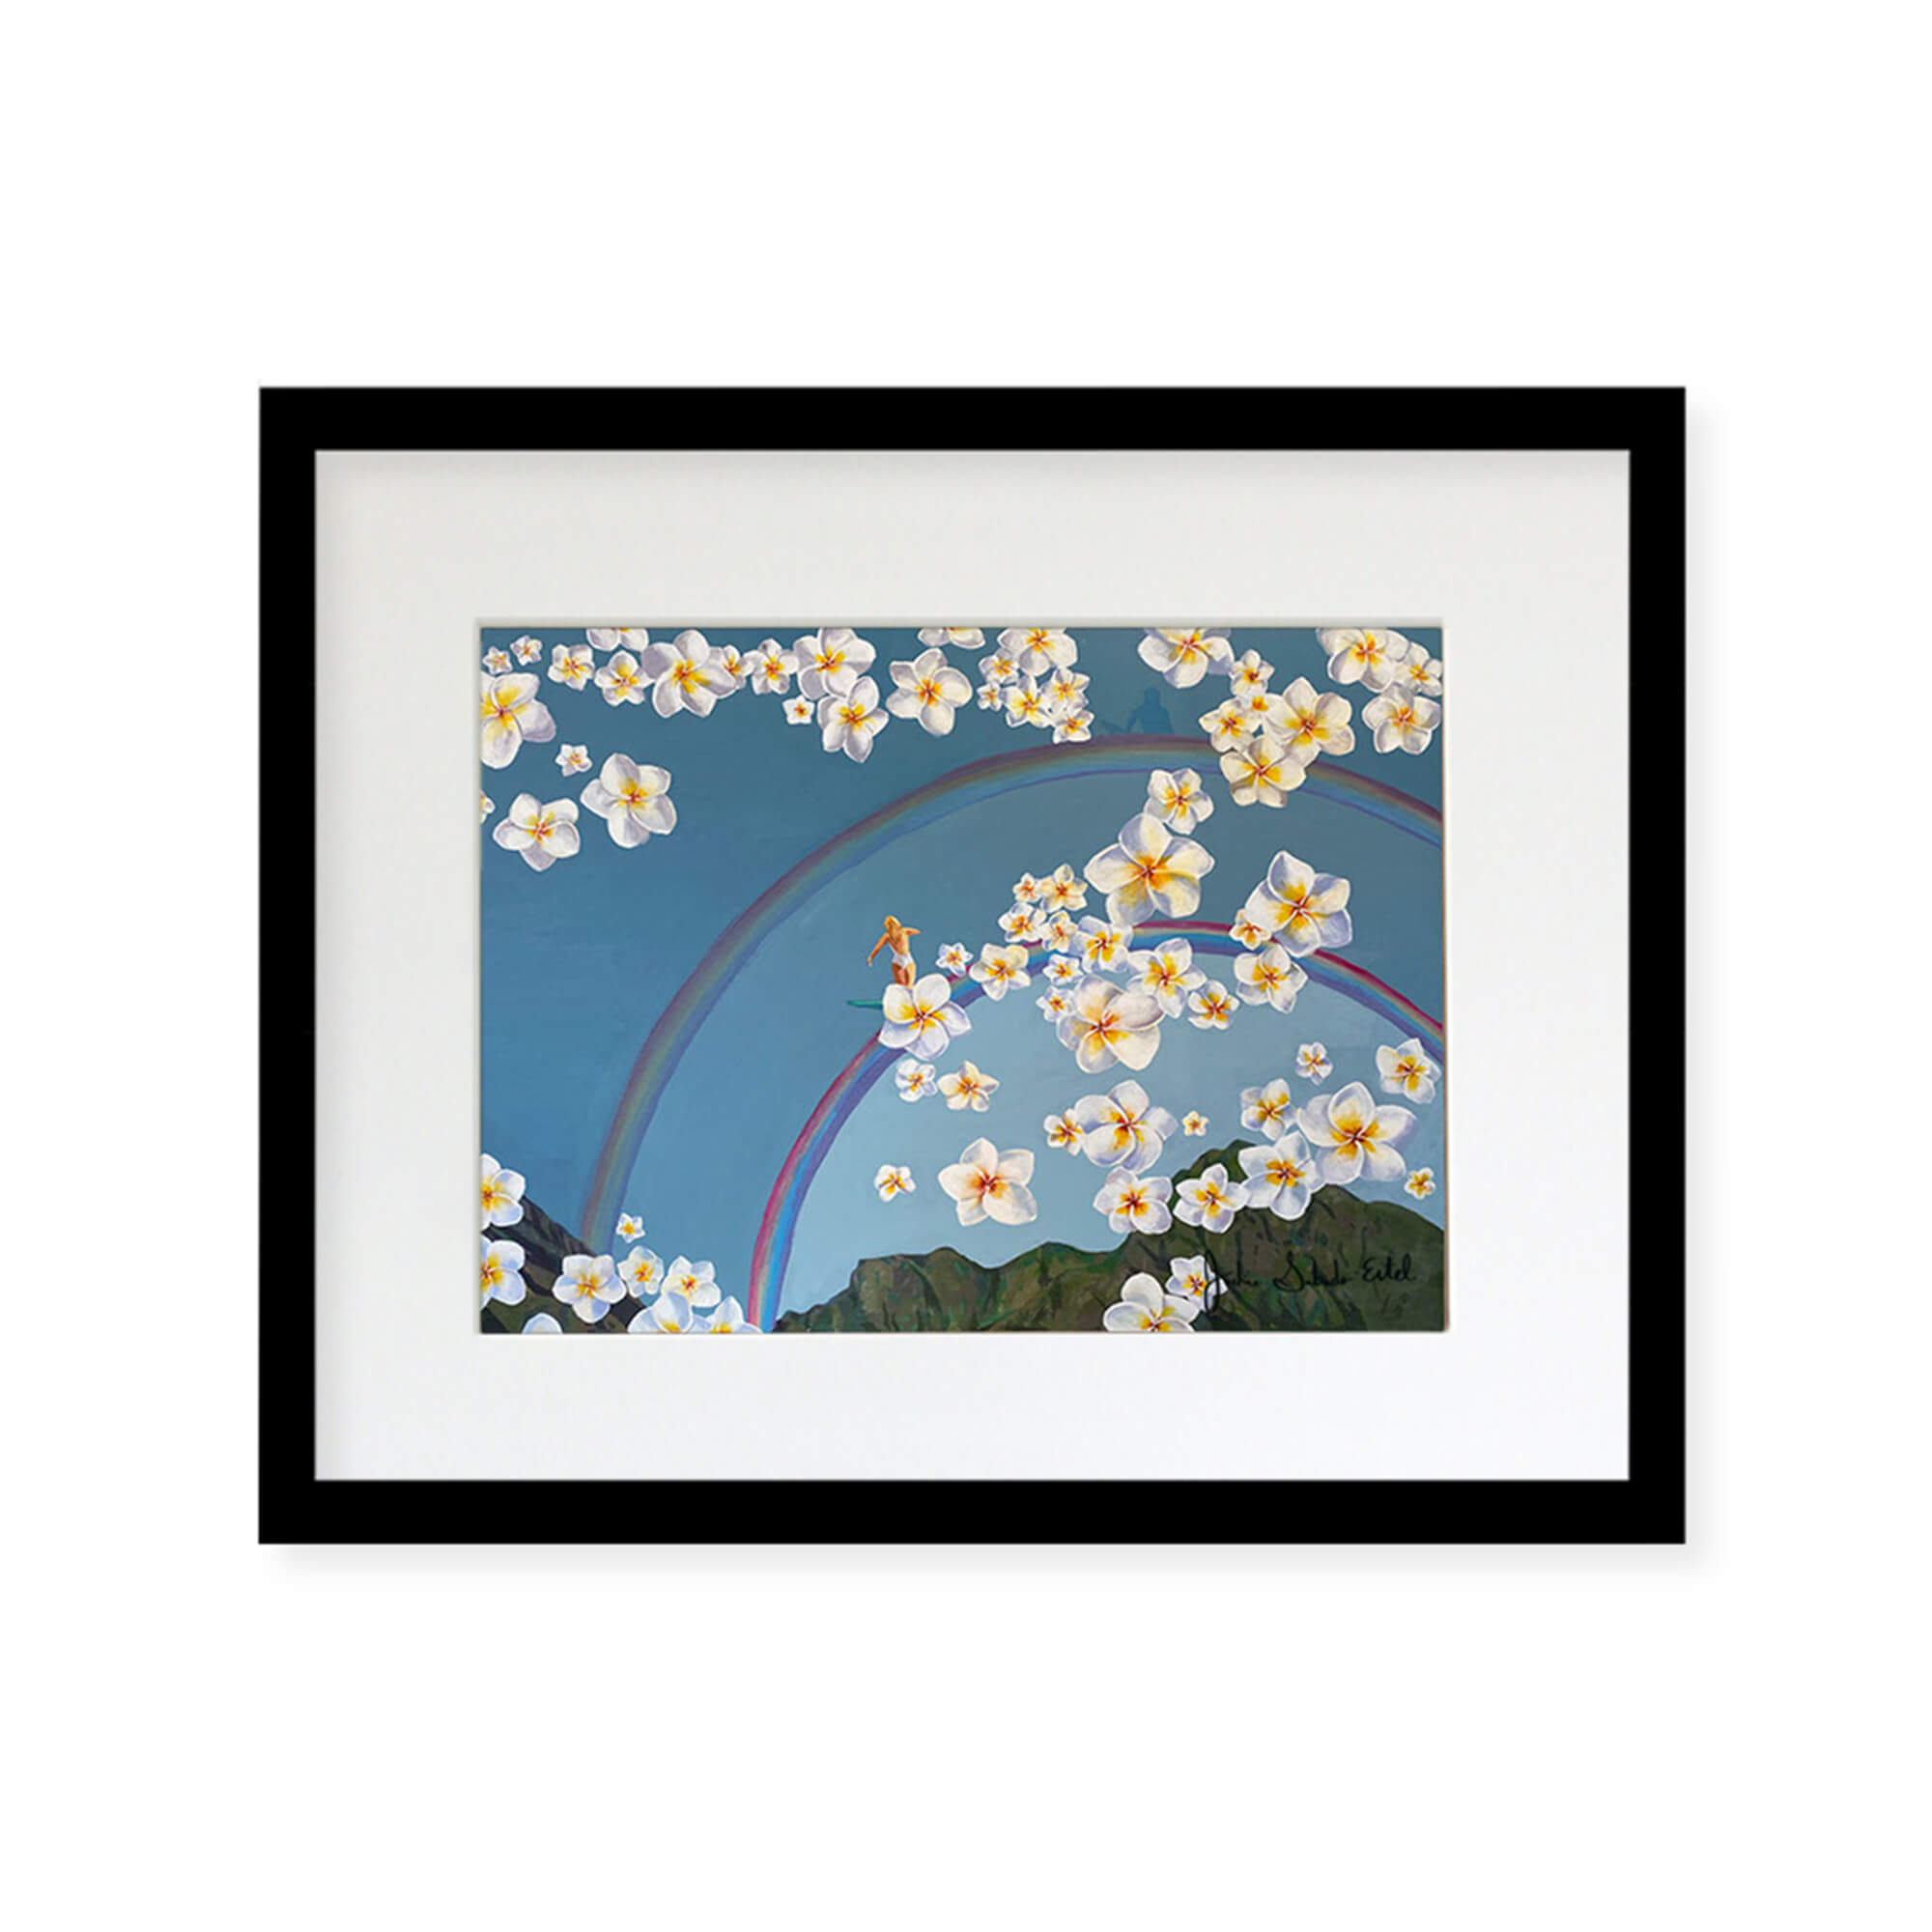 A framed matted art print featuring a woman surfing on a rainbow above the mountains of Hawaii framed by plumeria flowers by Hawaii artist Jackie Eitel